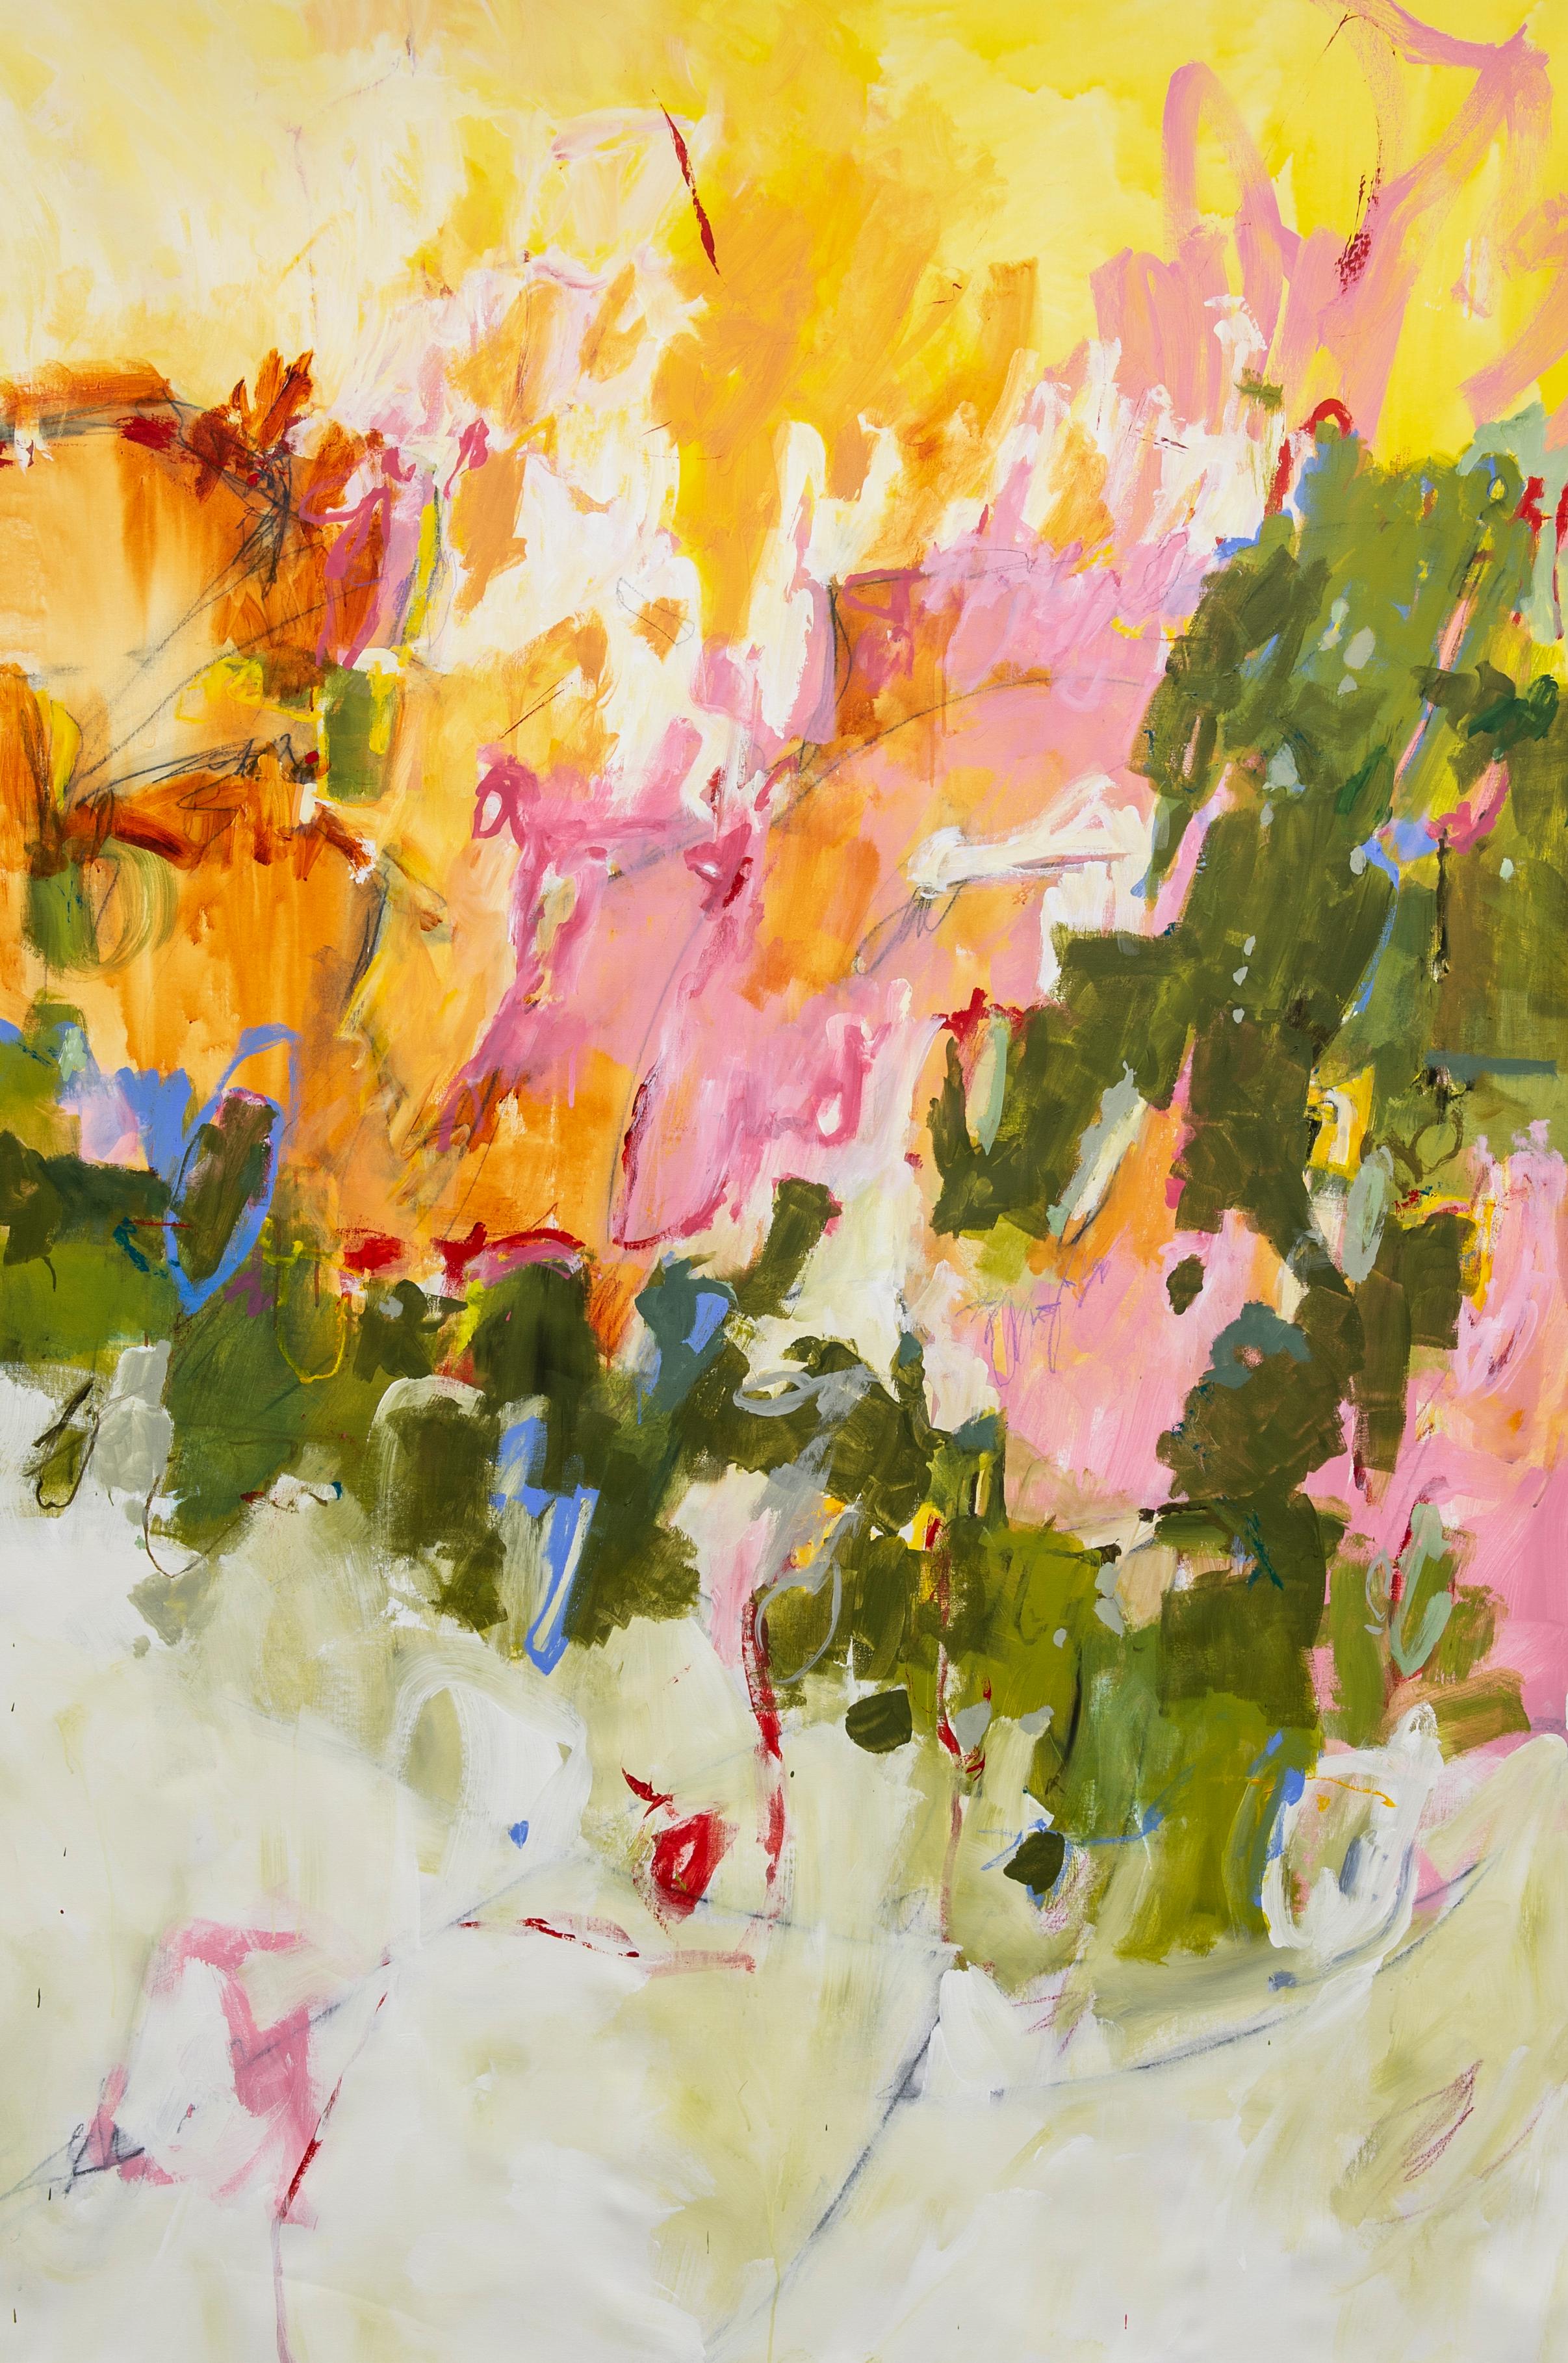 Jane Burton uses her mastery of colors to create powerful abstract & vibrant compositions. "Breaking Through"  is a stunning oversized original abstract painting full of color & movement created with acrylic, dyes, inks... combining textures &